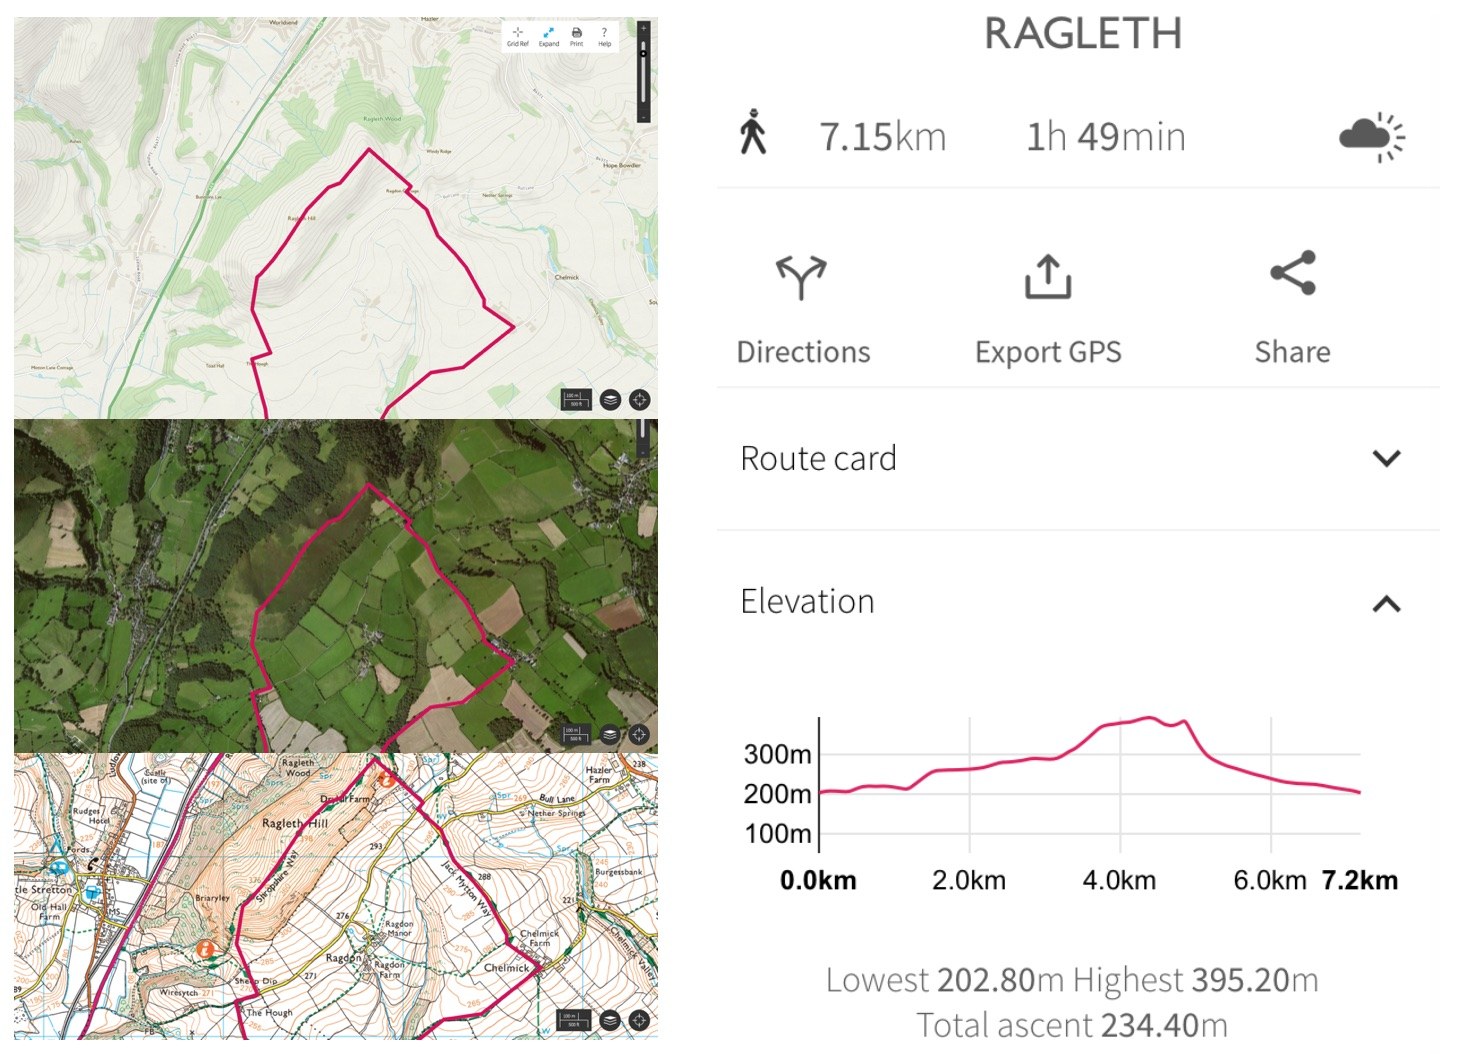 OS Maps showing different views of the Ragleth Hill walk